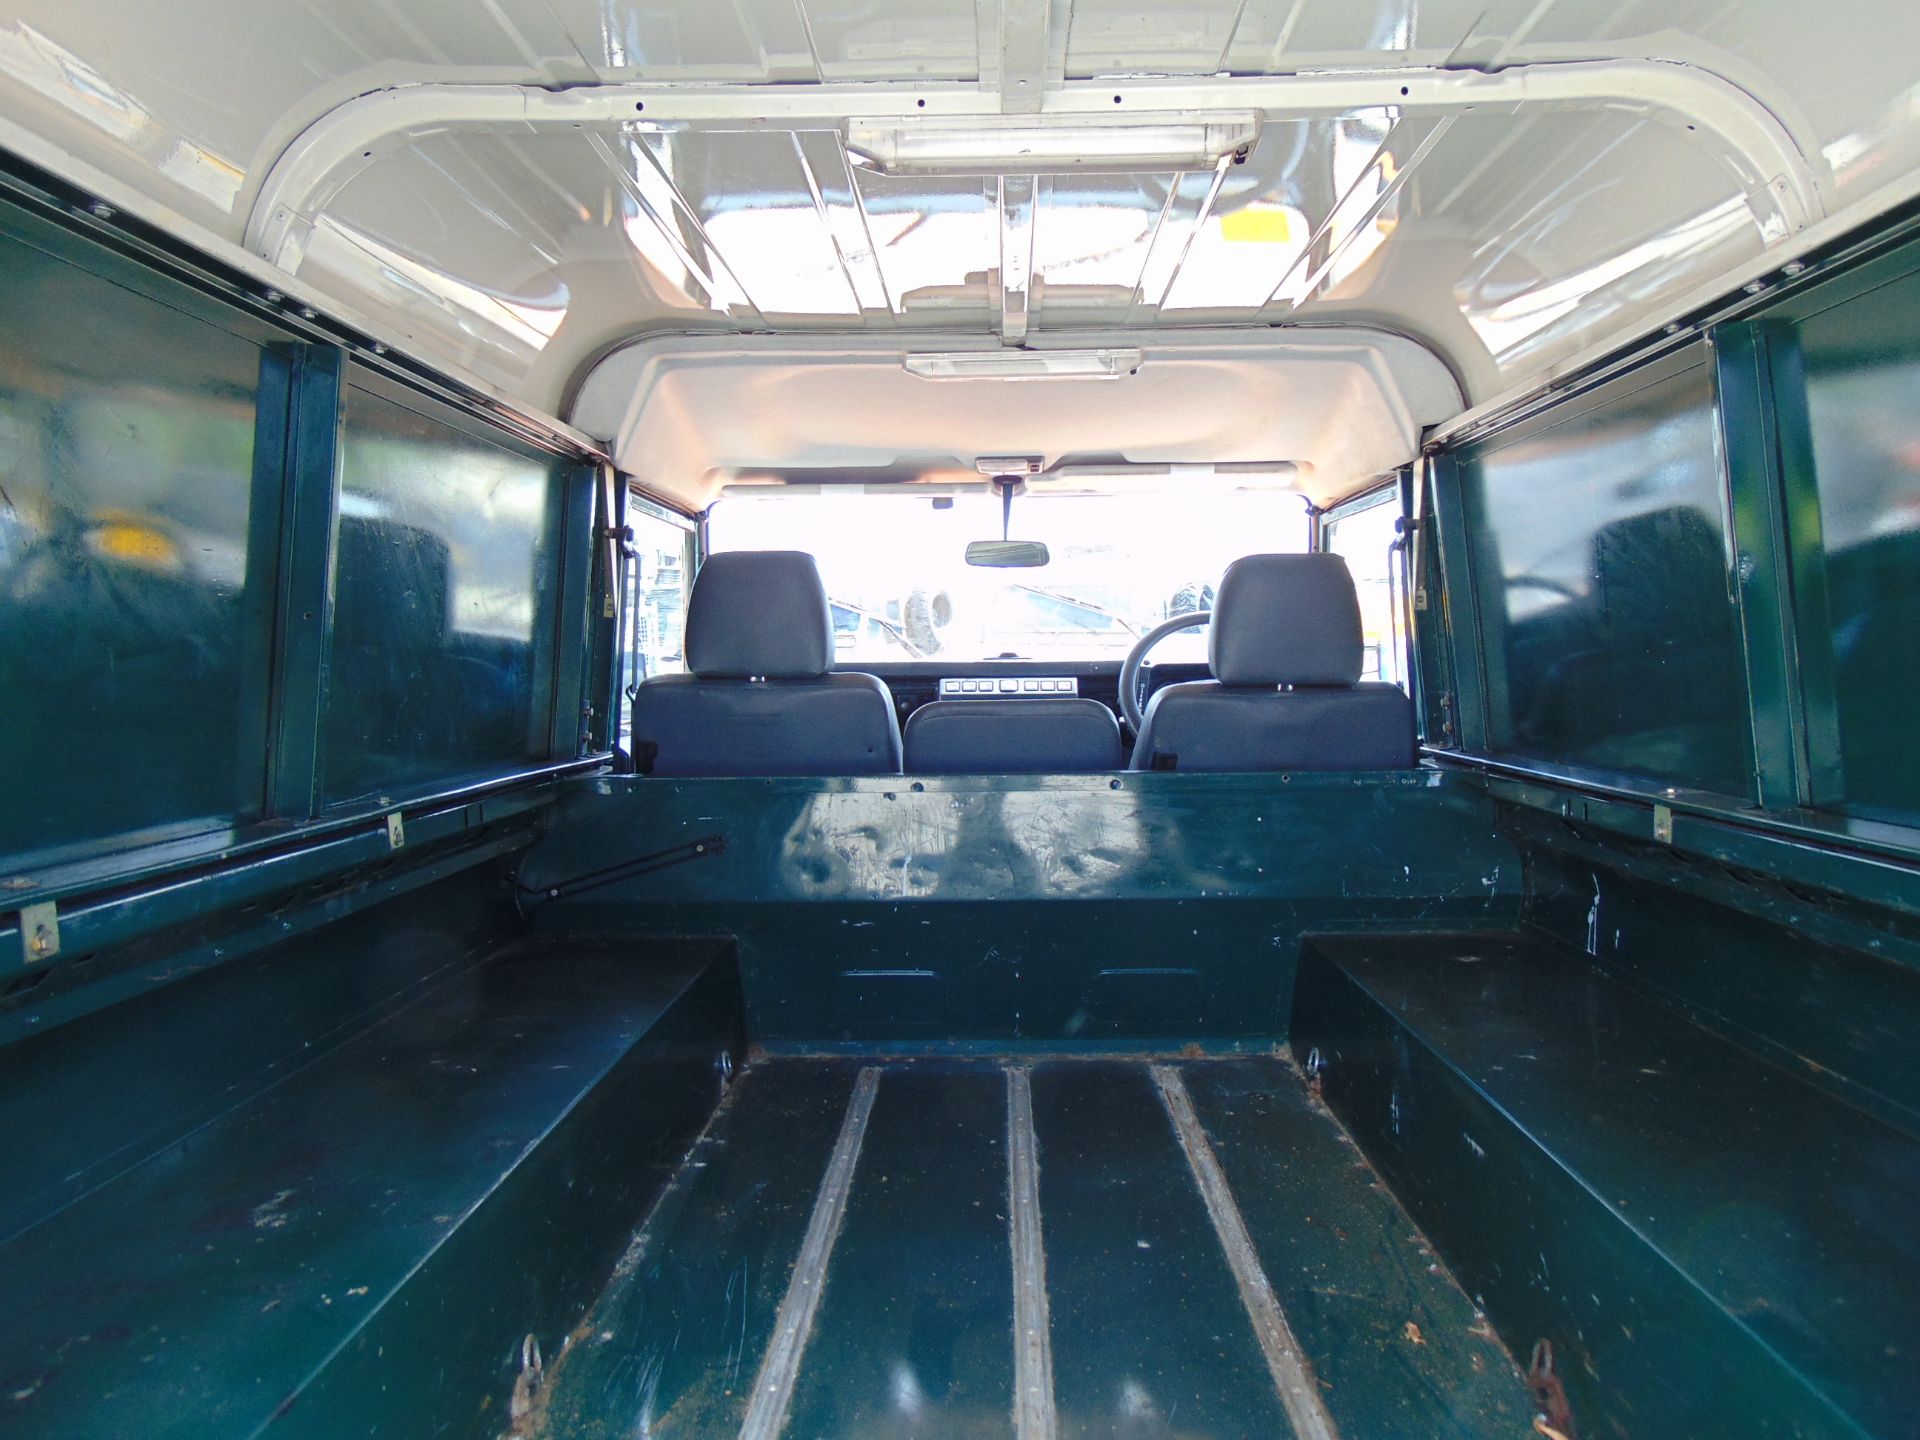 Land Rover 110 TD5 Hard Top - Image 15 of 17